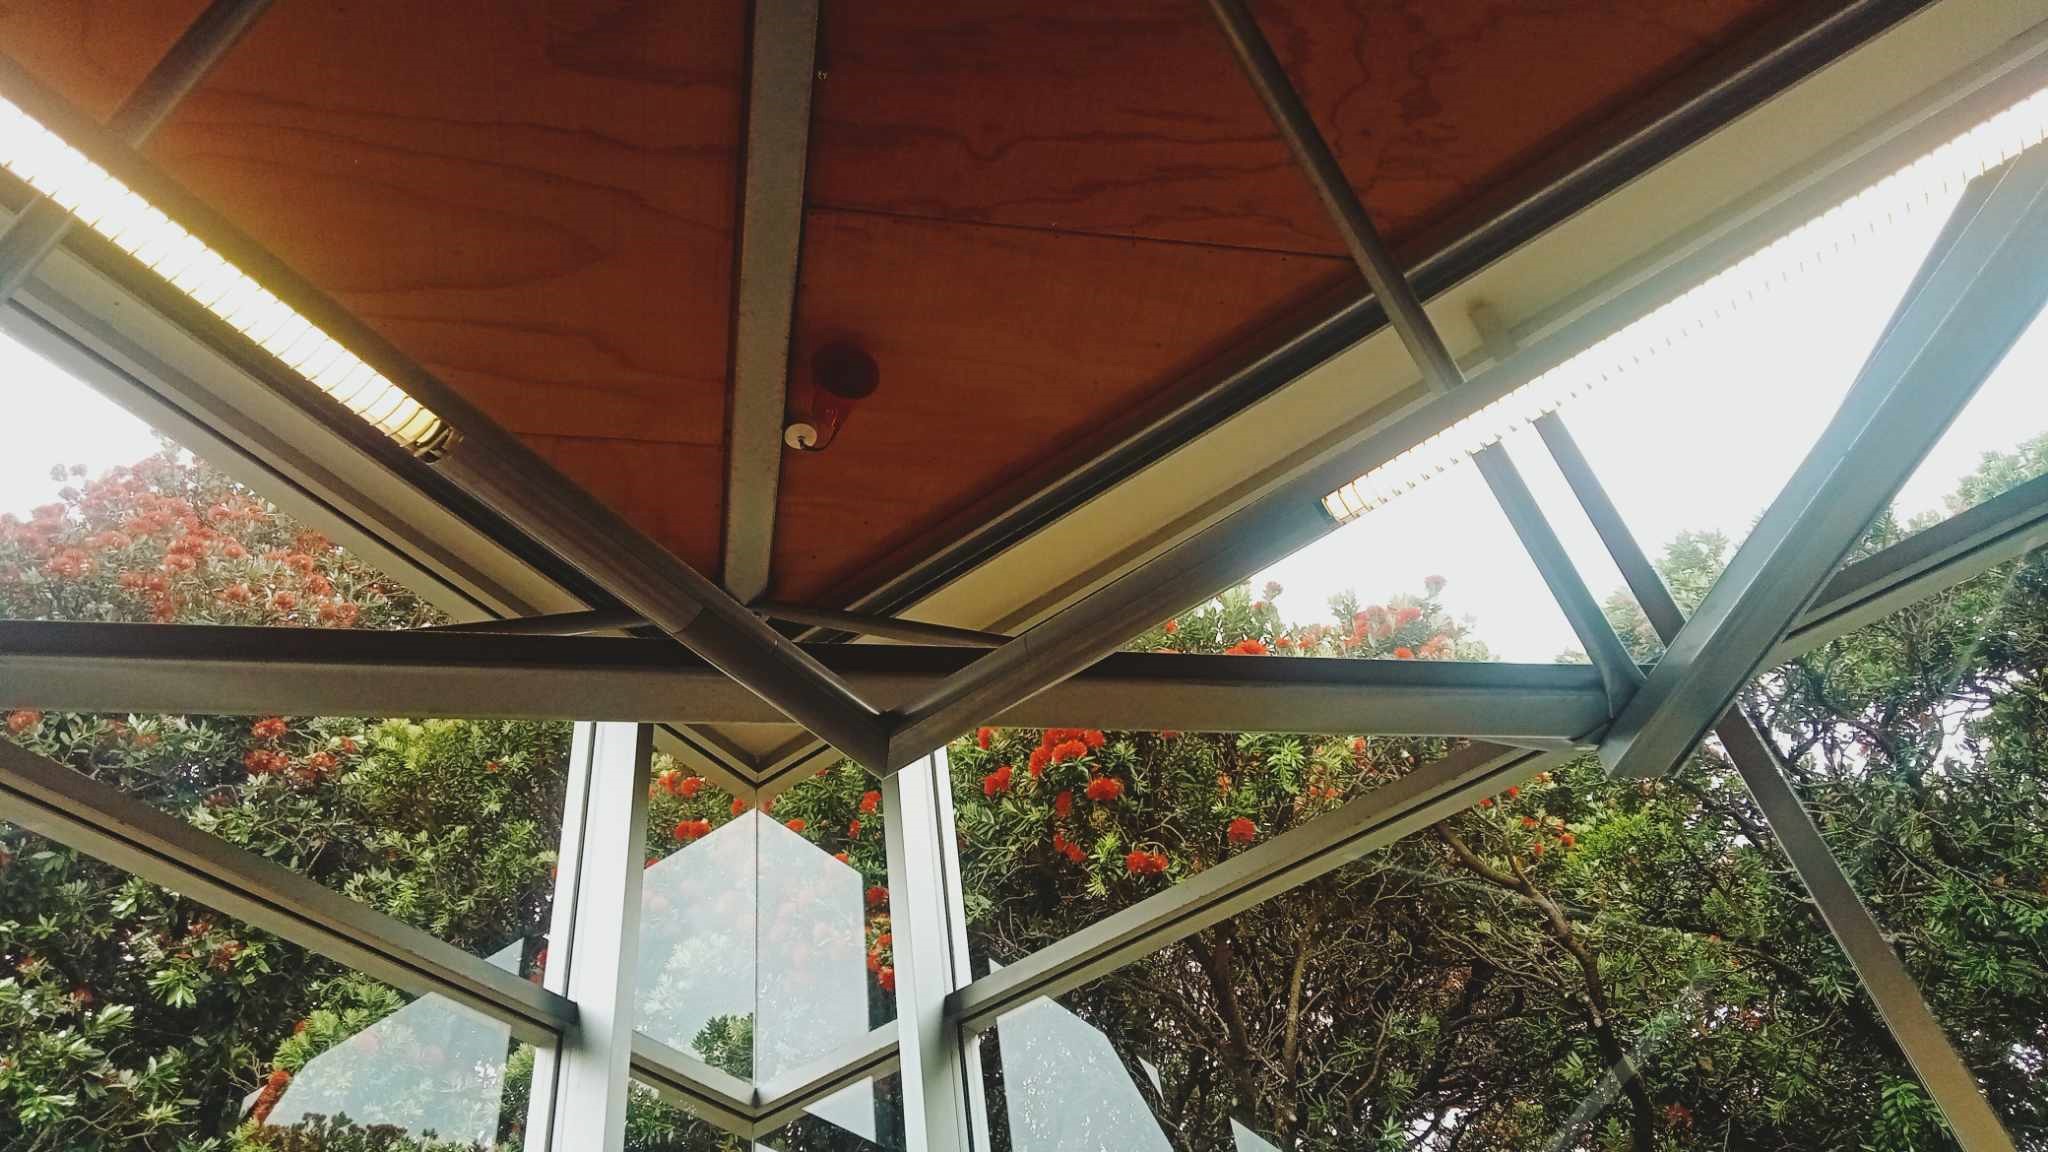 The corner of the building. Orange-toned wood on the ceiling, with a large corner window looking towards a Pohutukawa tree with vibrant red flowers.